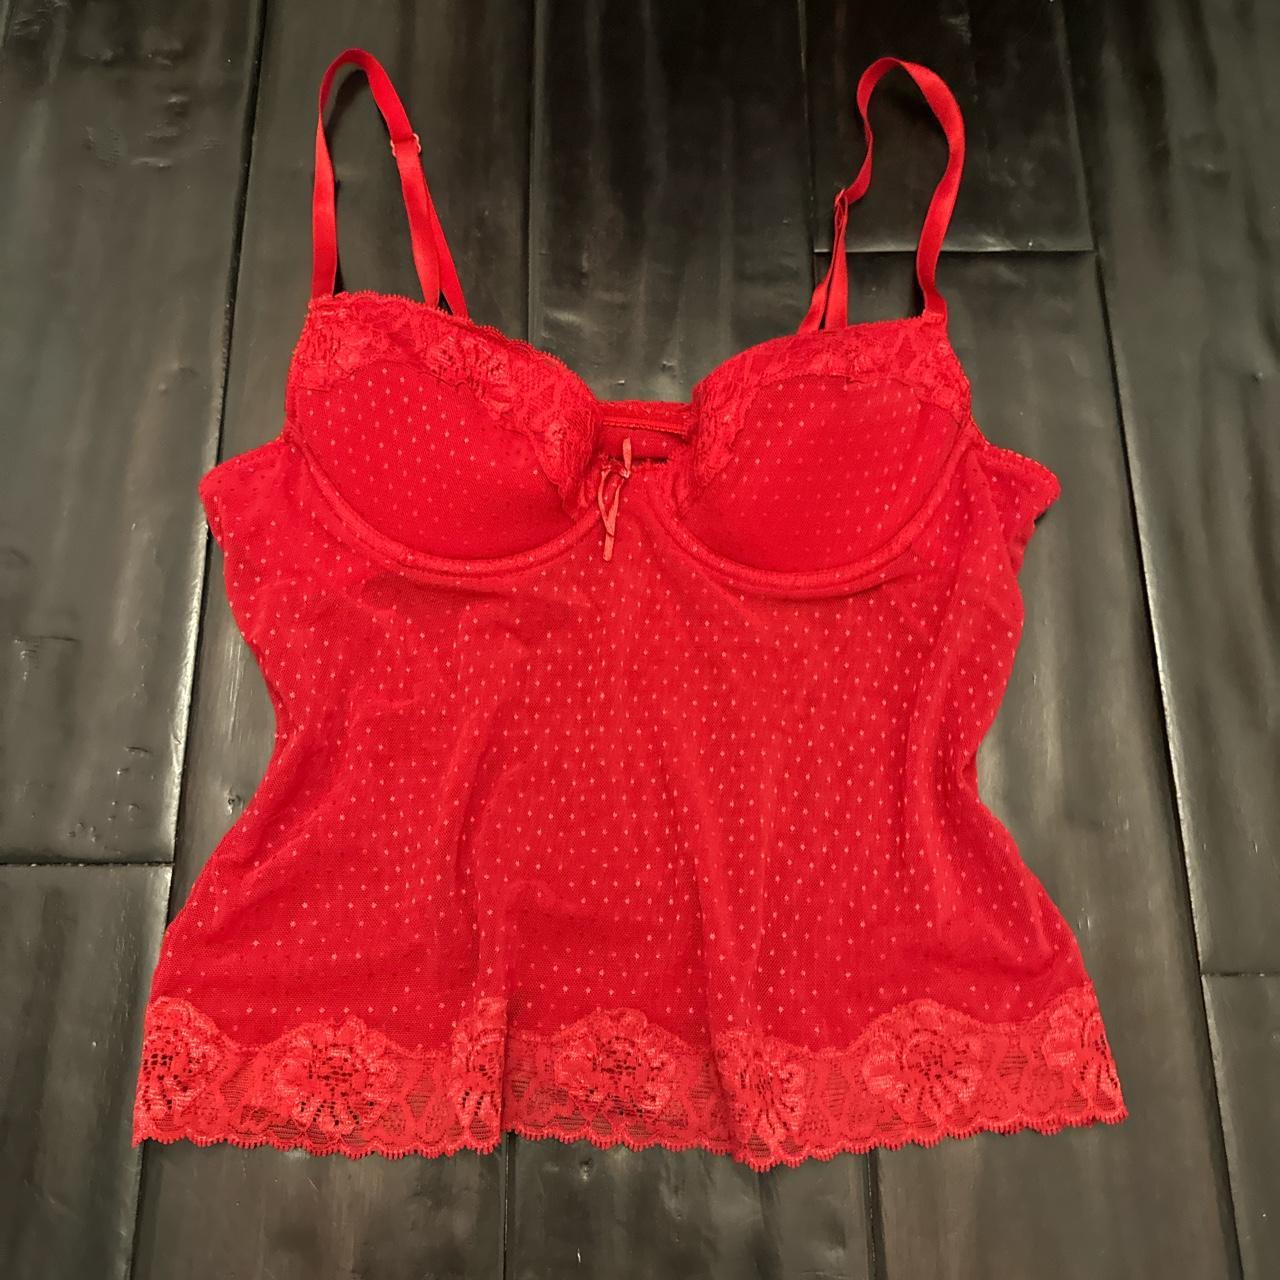 Super cute red lace mesh bustier corset top! Perfect